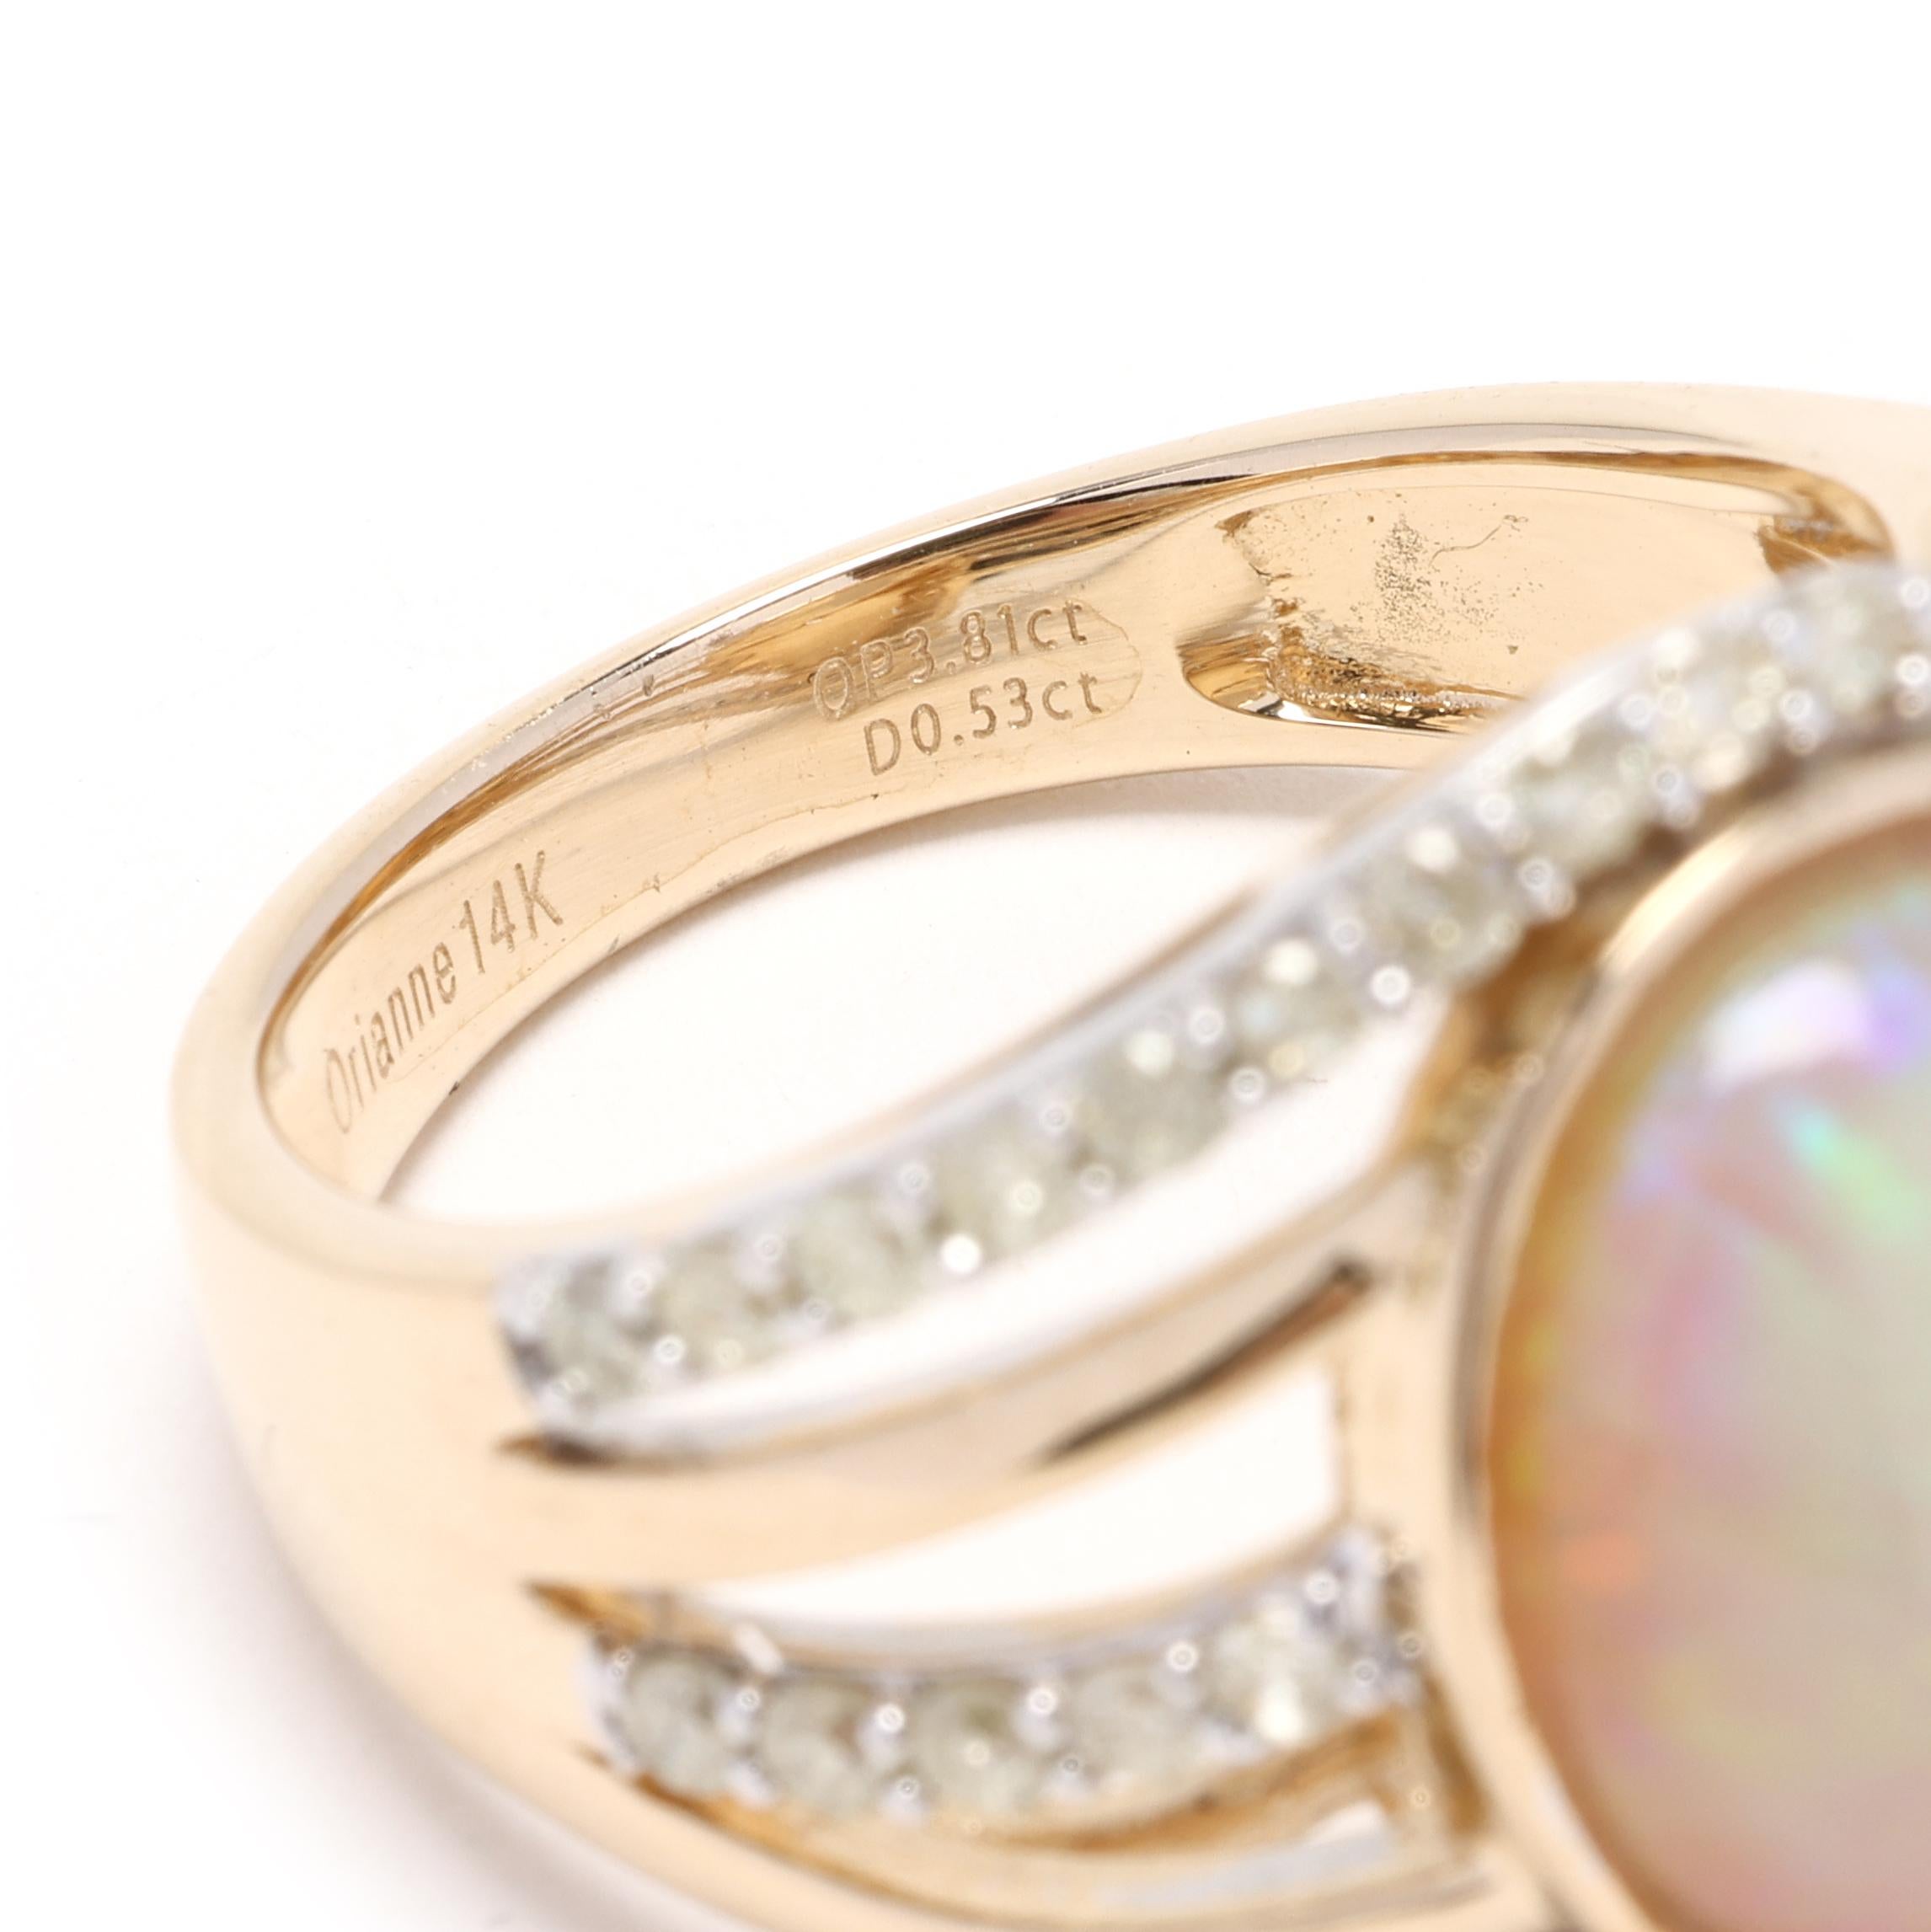 Orianne Diamond and Opal Statement Ring, 14k Yellow Gold, Ring Size 7 1